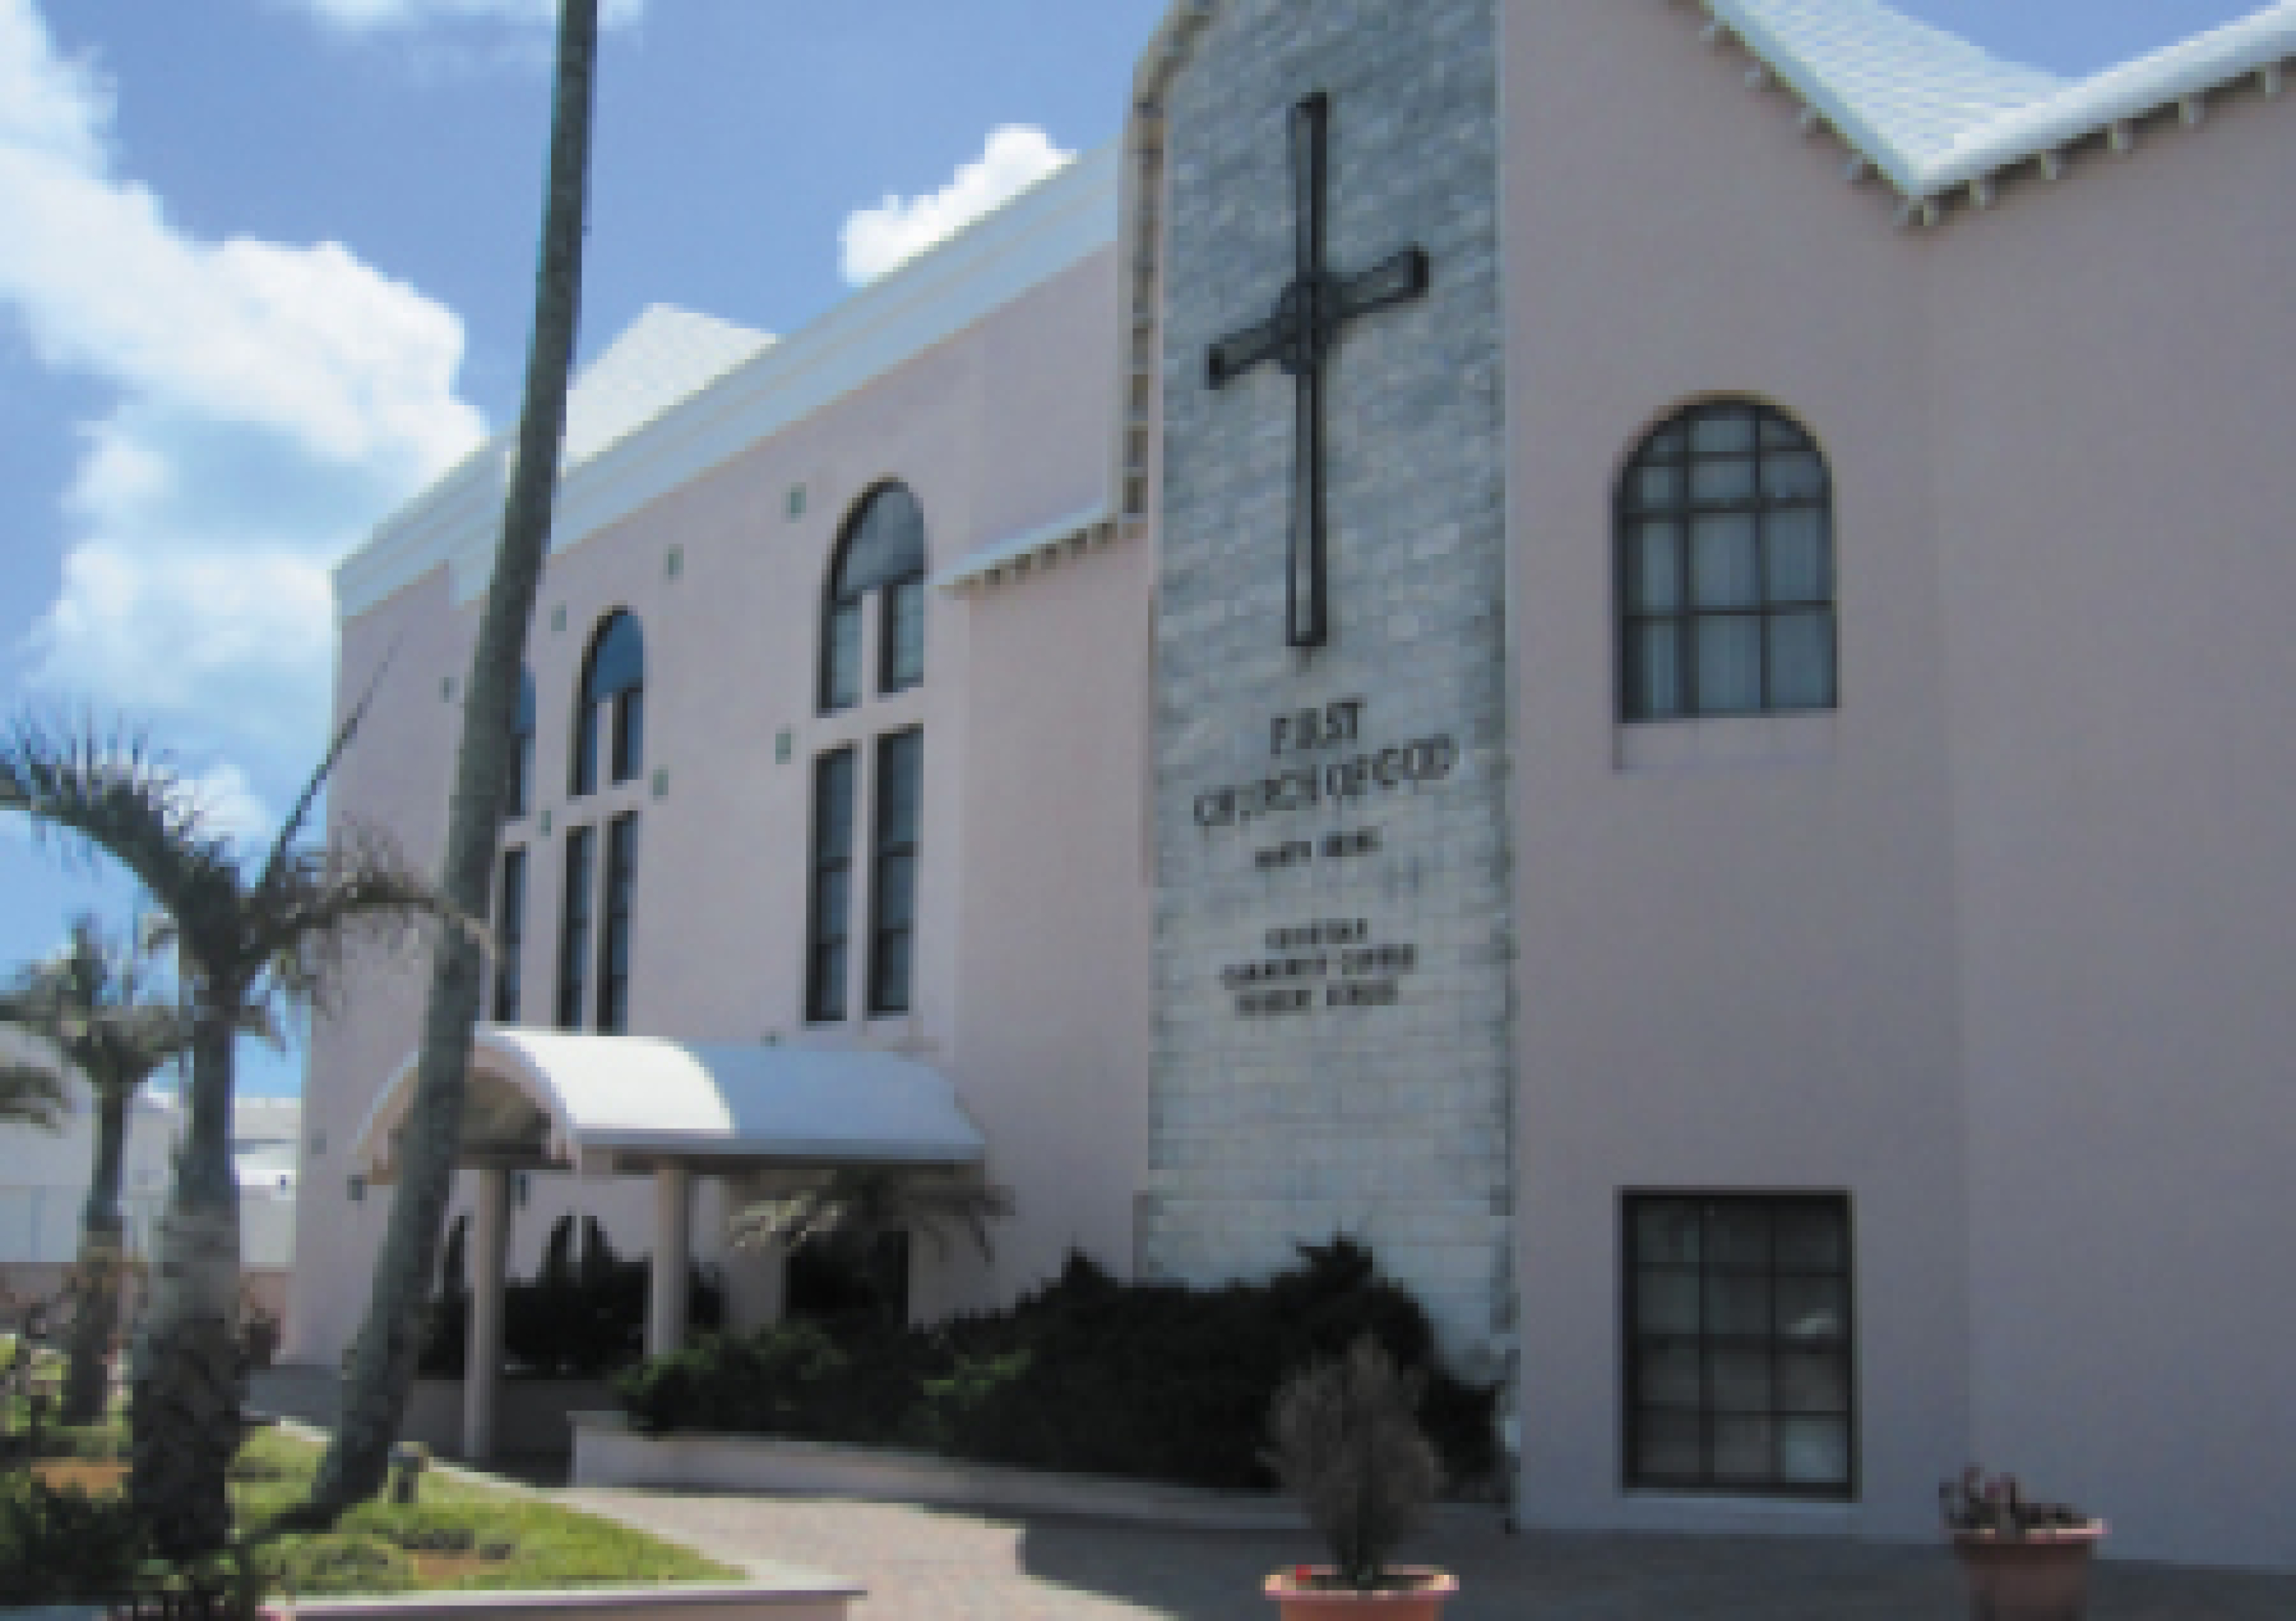 First Church Of God, (North Shore)